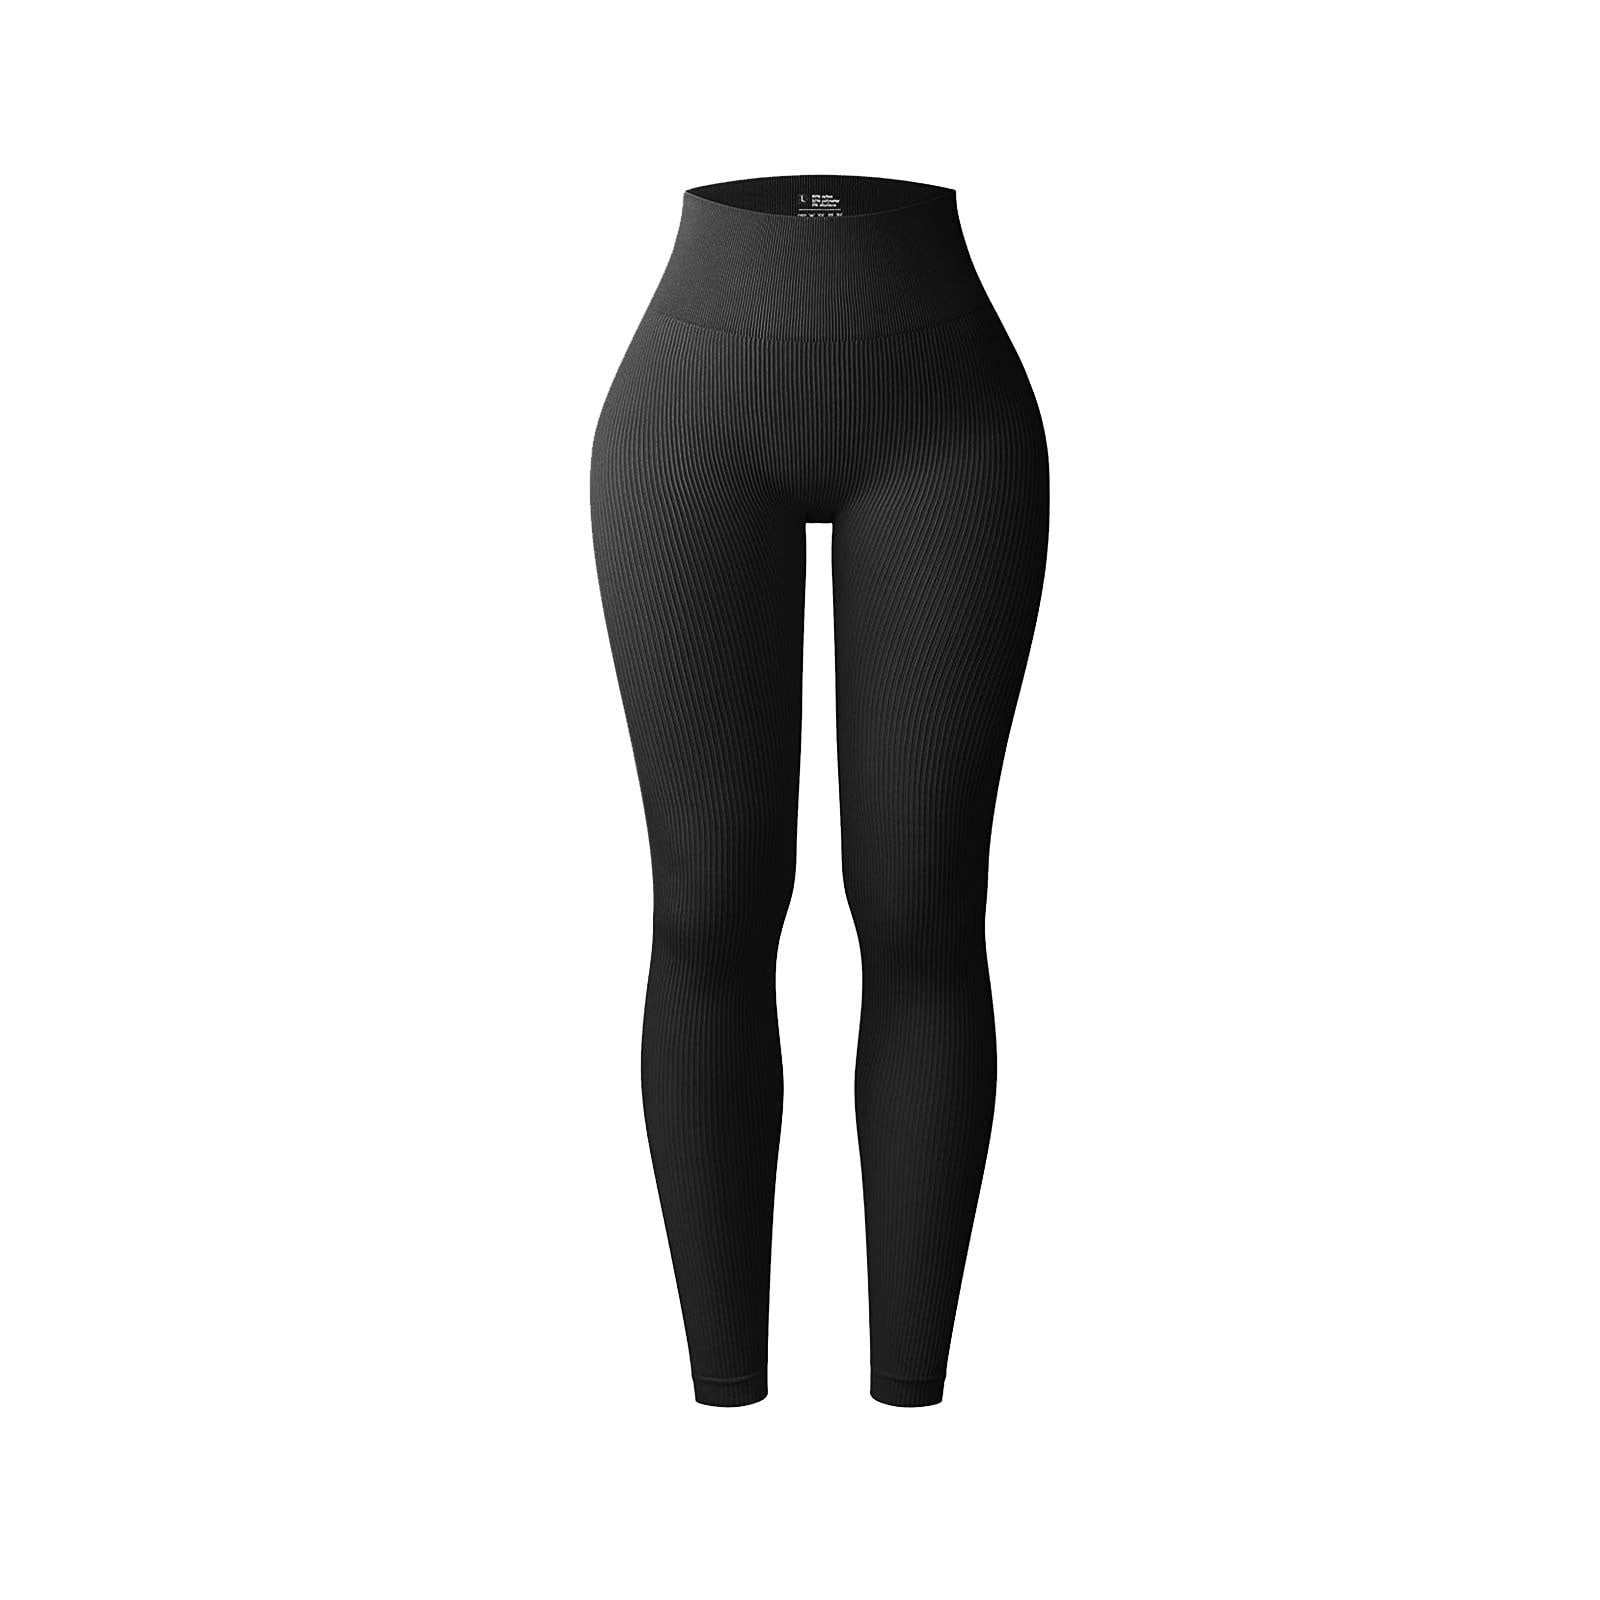 Lovskoo Scrunch Butt Lift Leggings for Women Workout Yoga Pants Ruched  Booty High Waist Seamless Leggings Compression Tights Black 